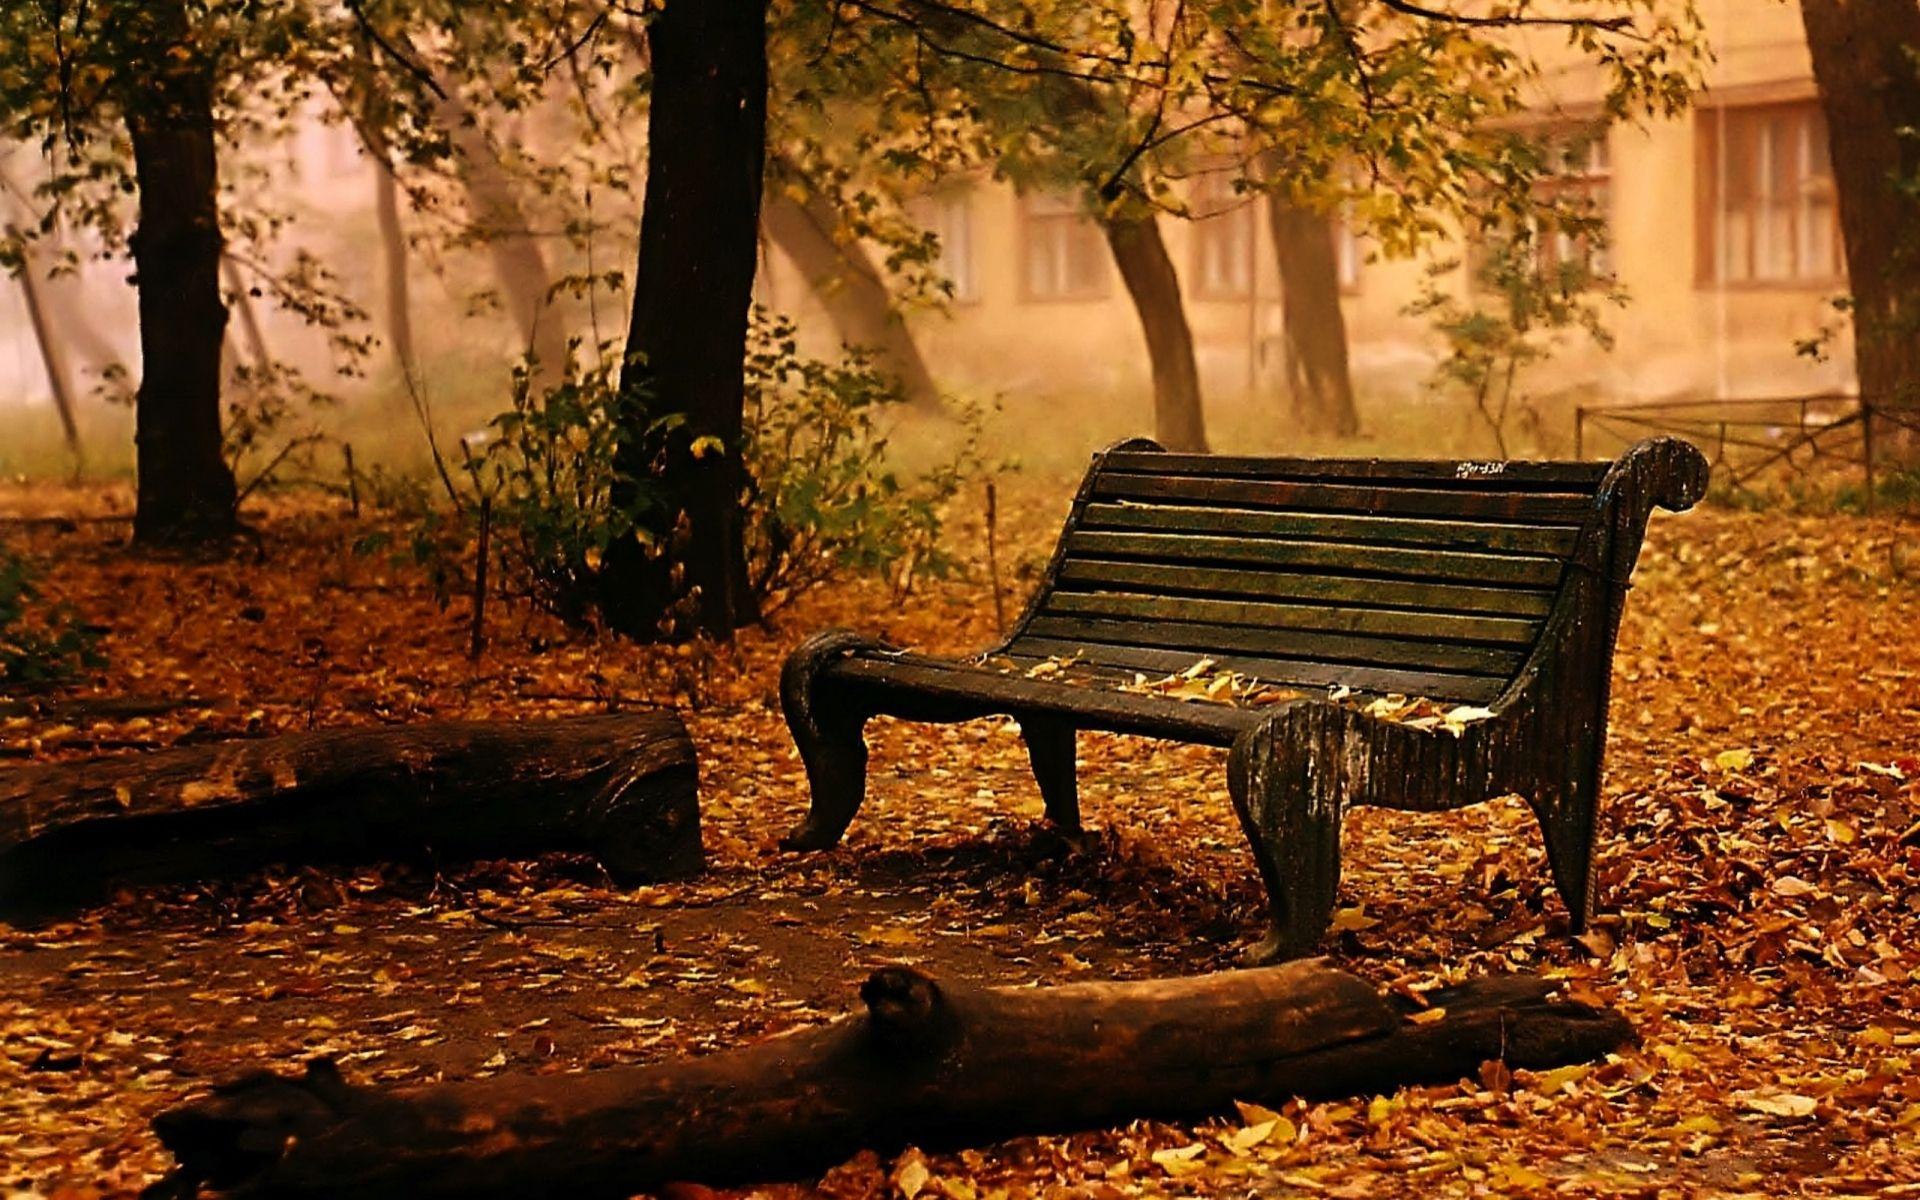 Landscapes bench chair seat autumn fall leaves trees mood wallpaperx1200